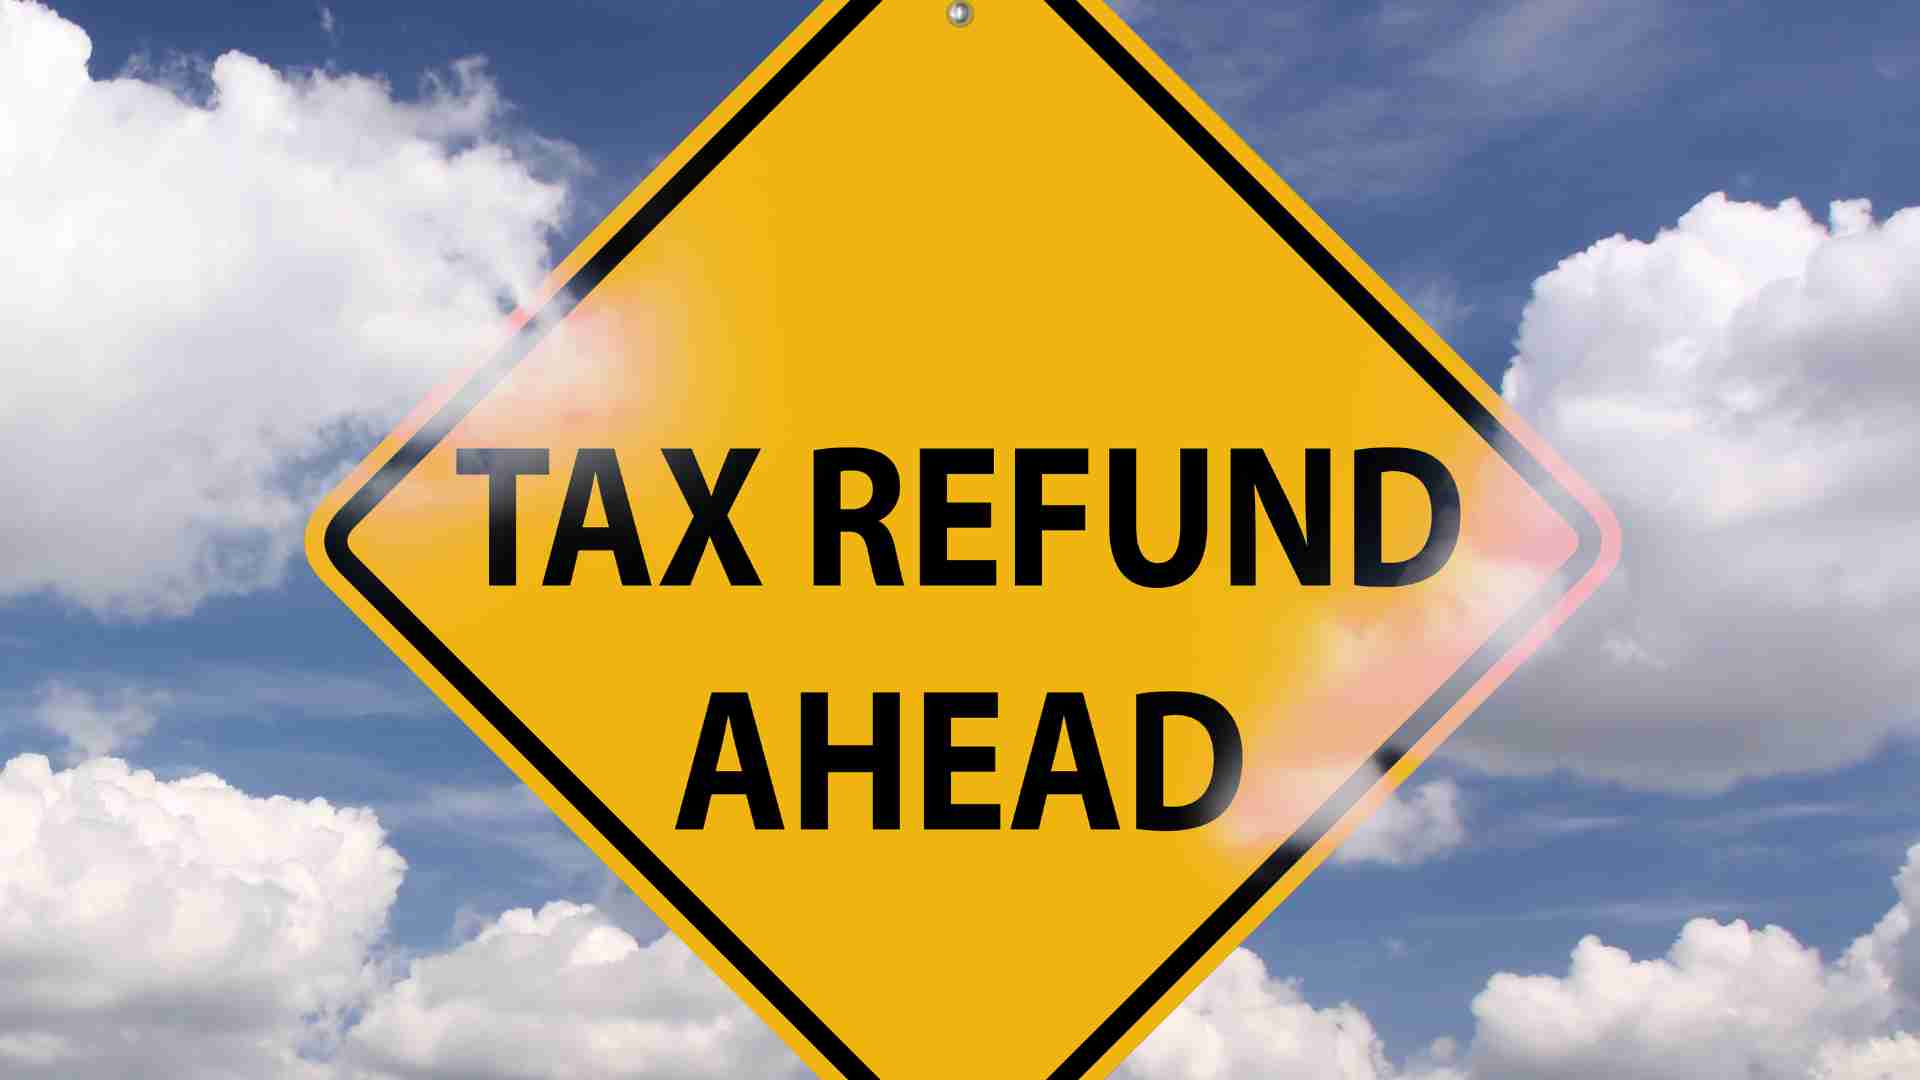 The IRS will continue sending tax refunds, so do not despair because yours may be on the way